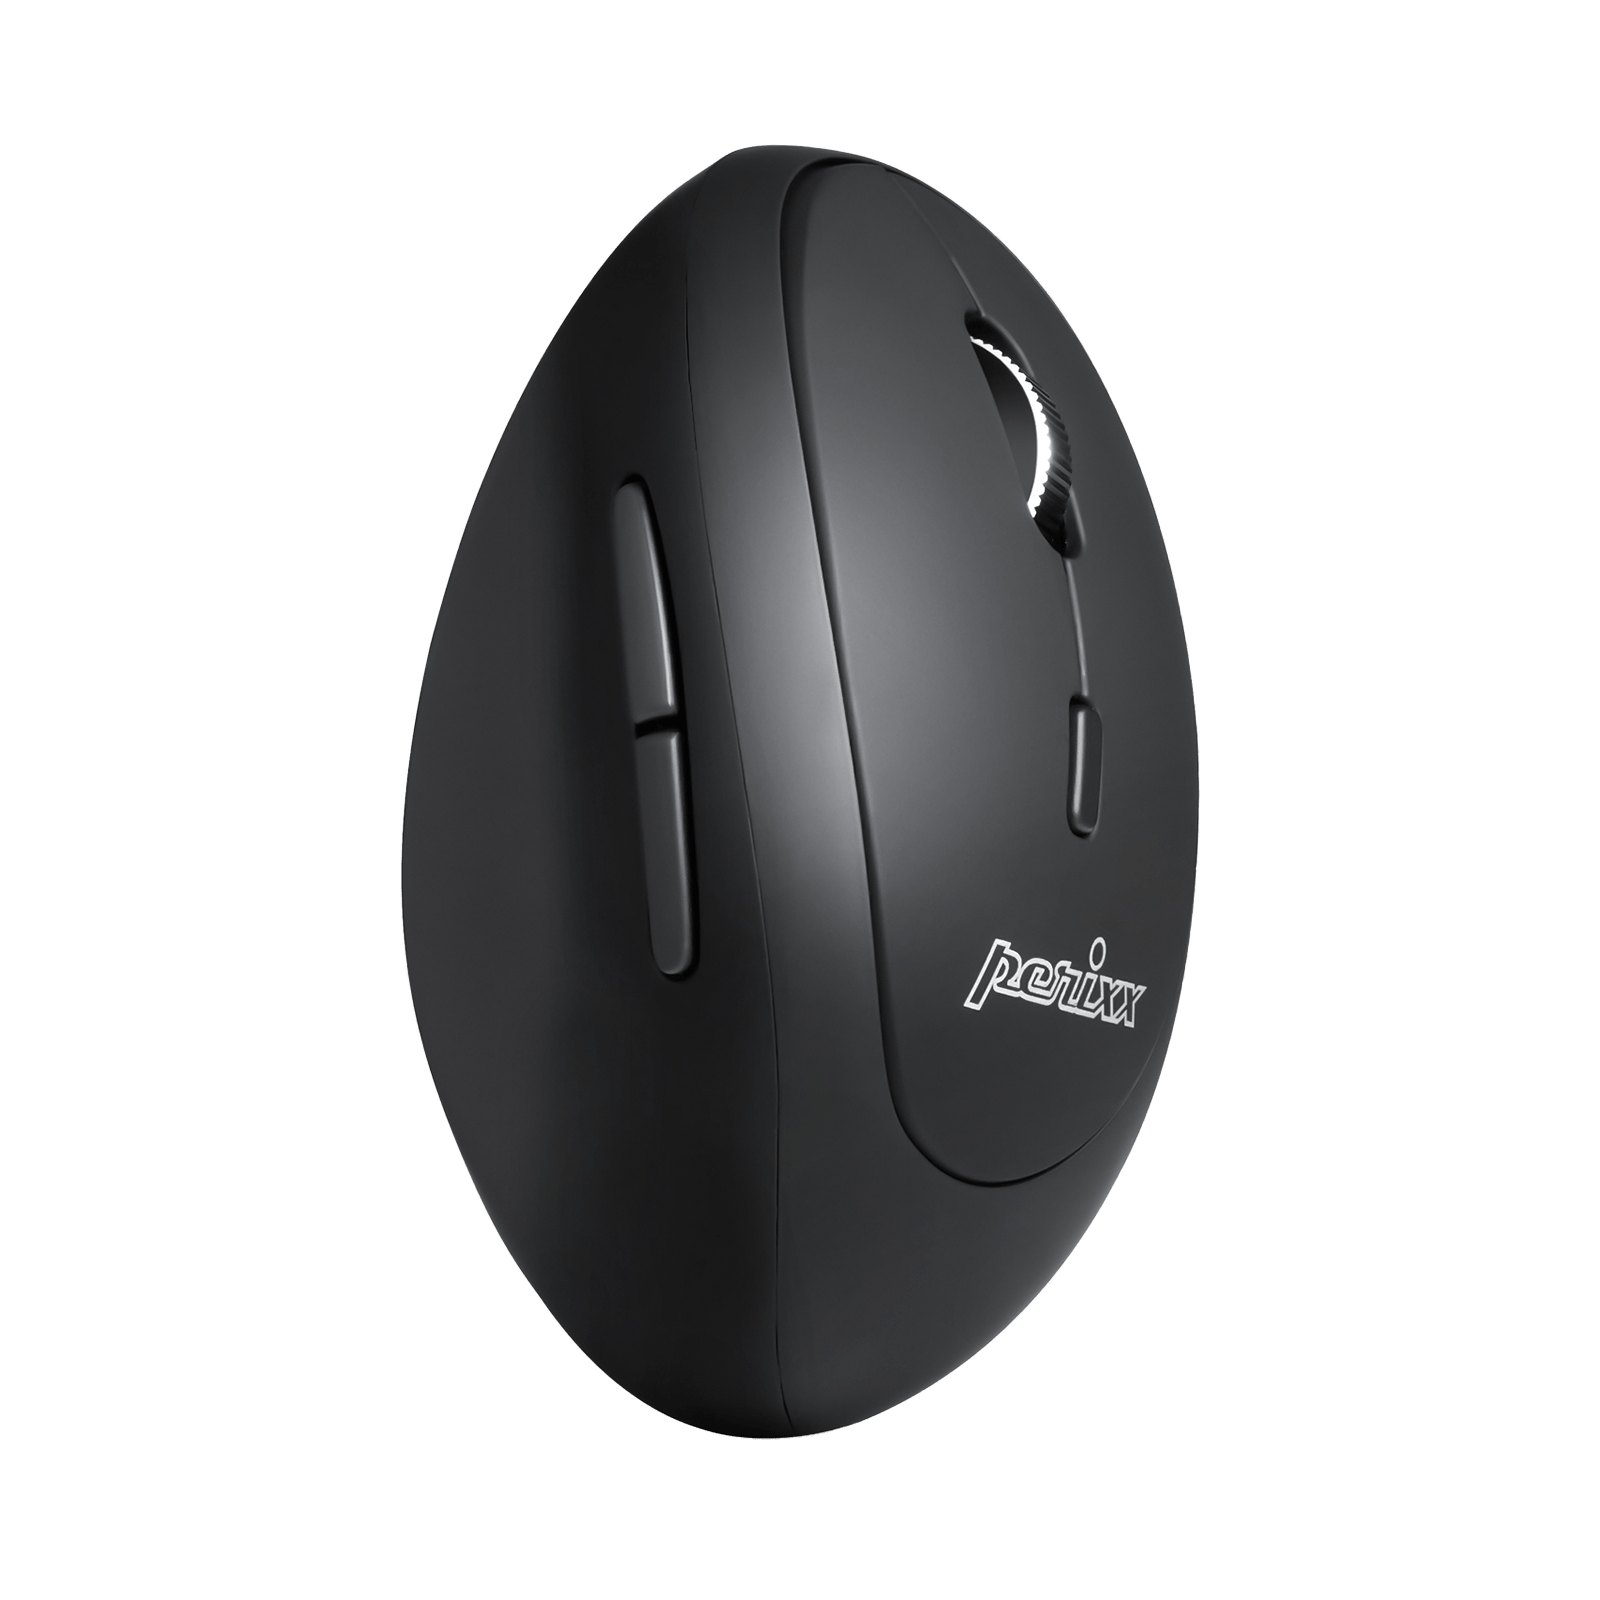 PERIMICE-719 - Wireless Ergonomic Vertical Mouse with Silent Click and Small Design - Perixx Europe